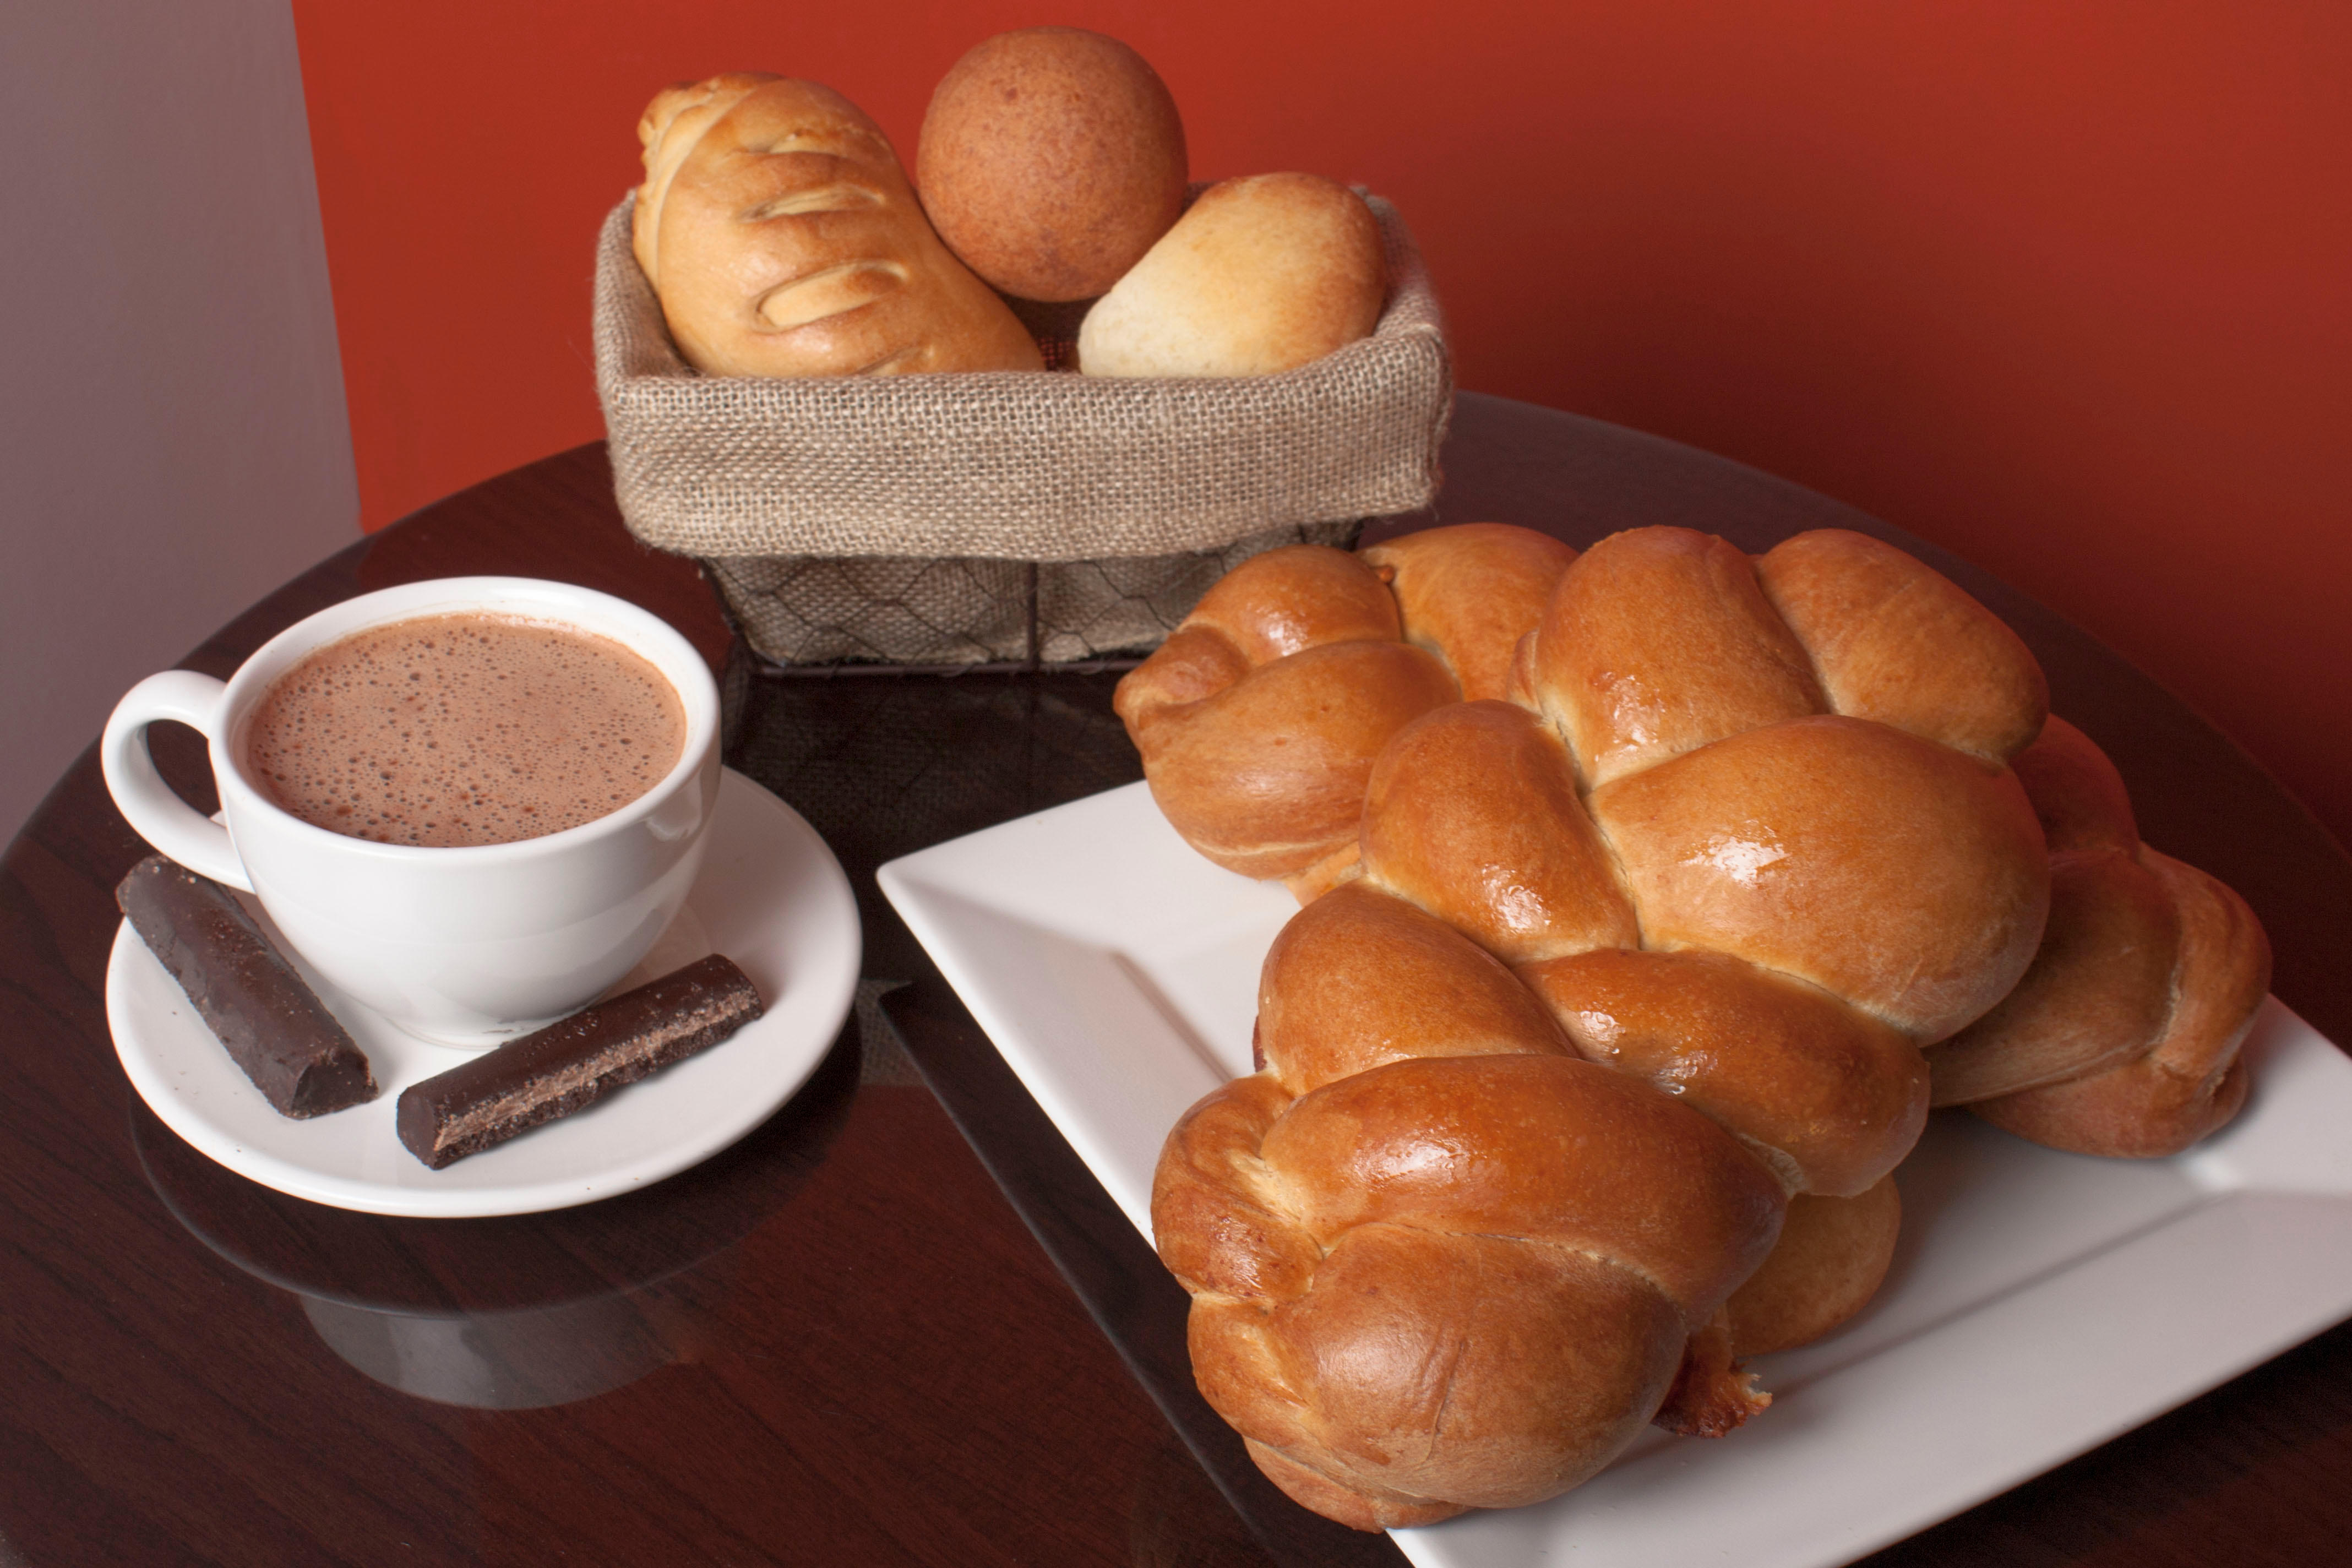 Braided bread and hot chocolate.